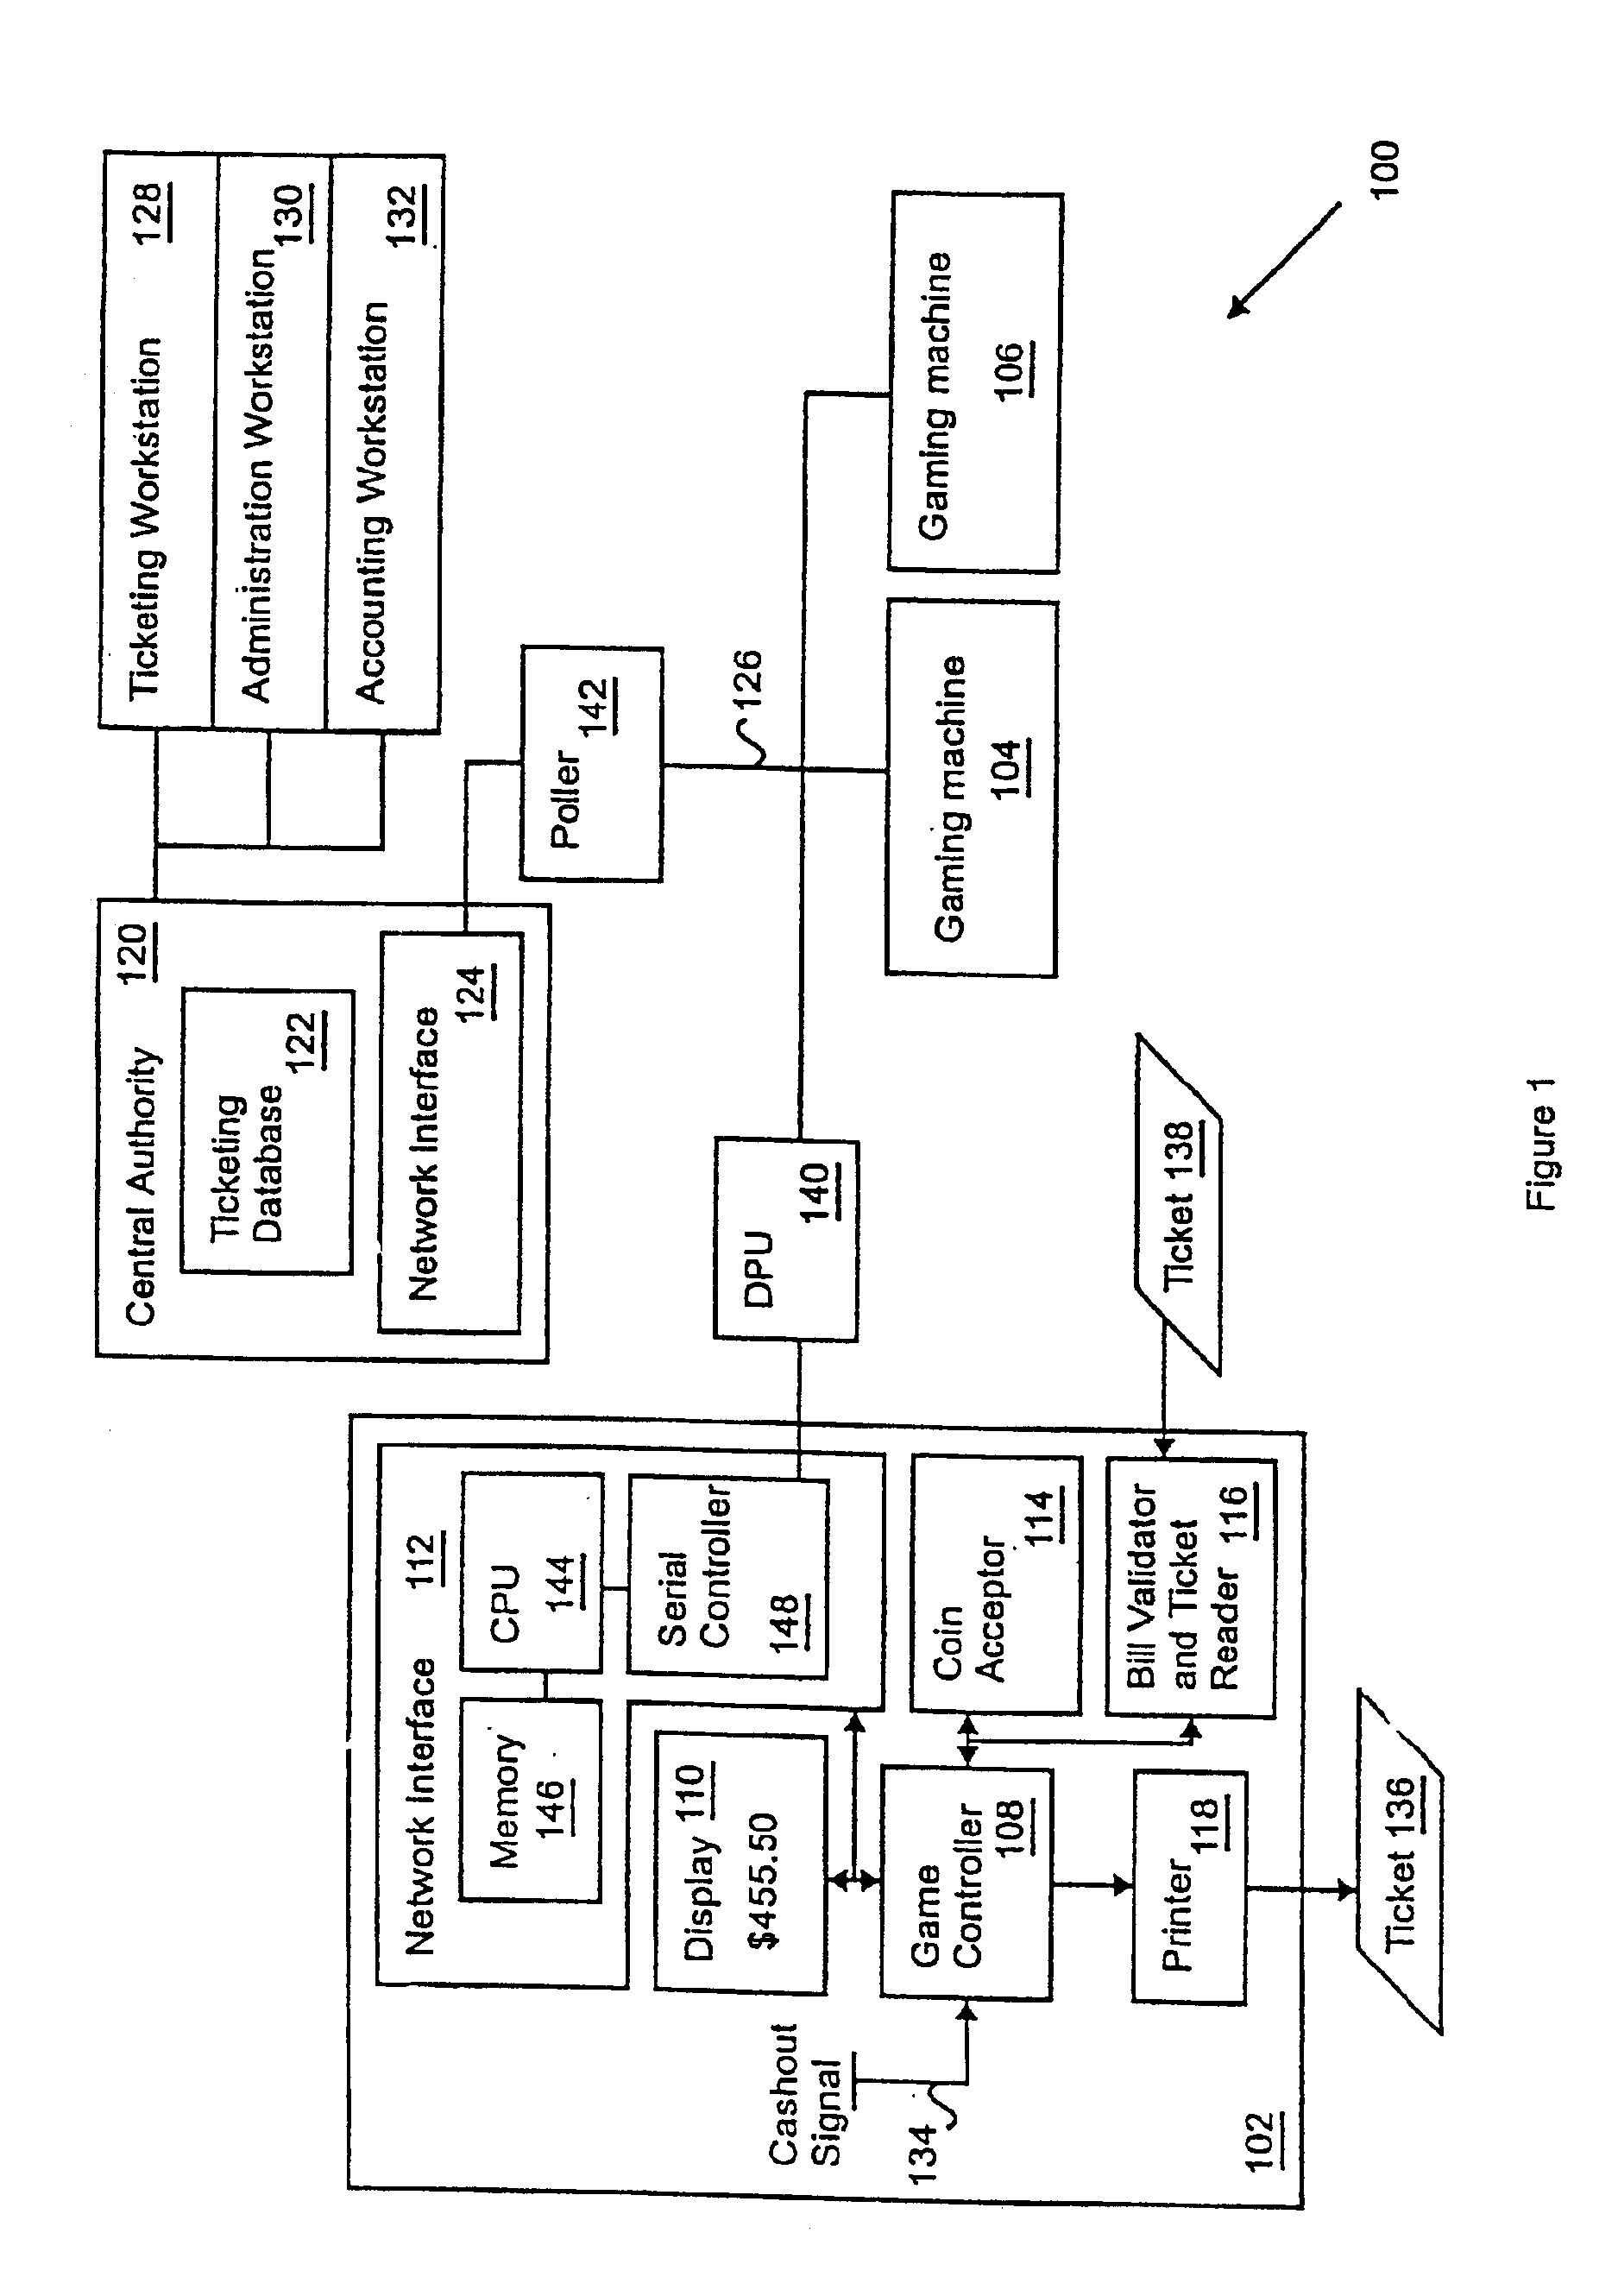 Apparatus and method for a cashless actuated gaming system